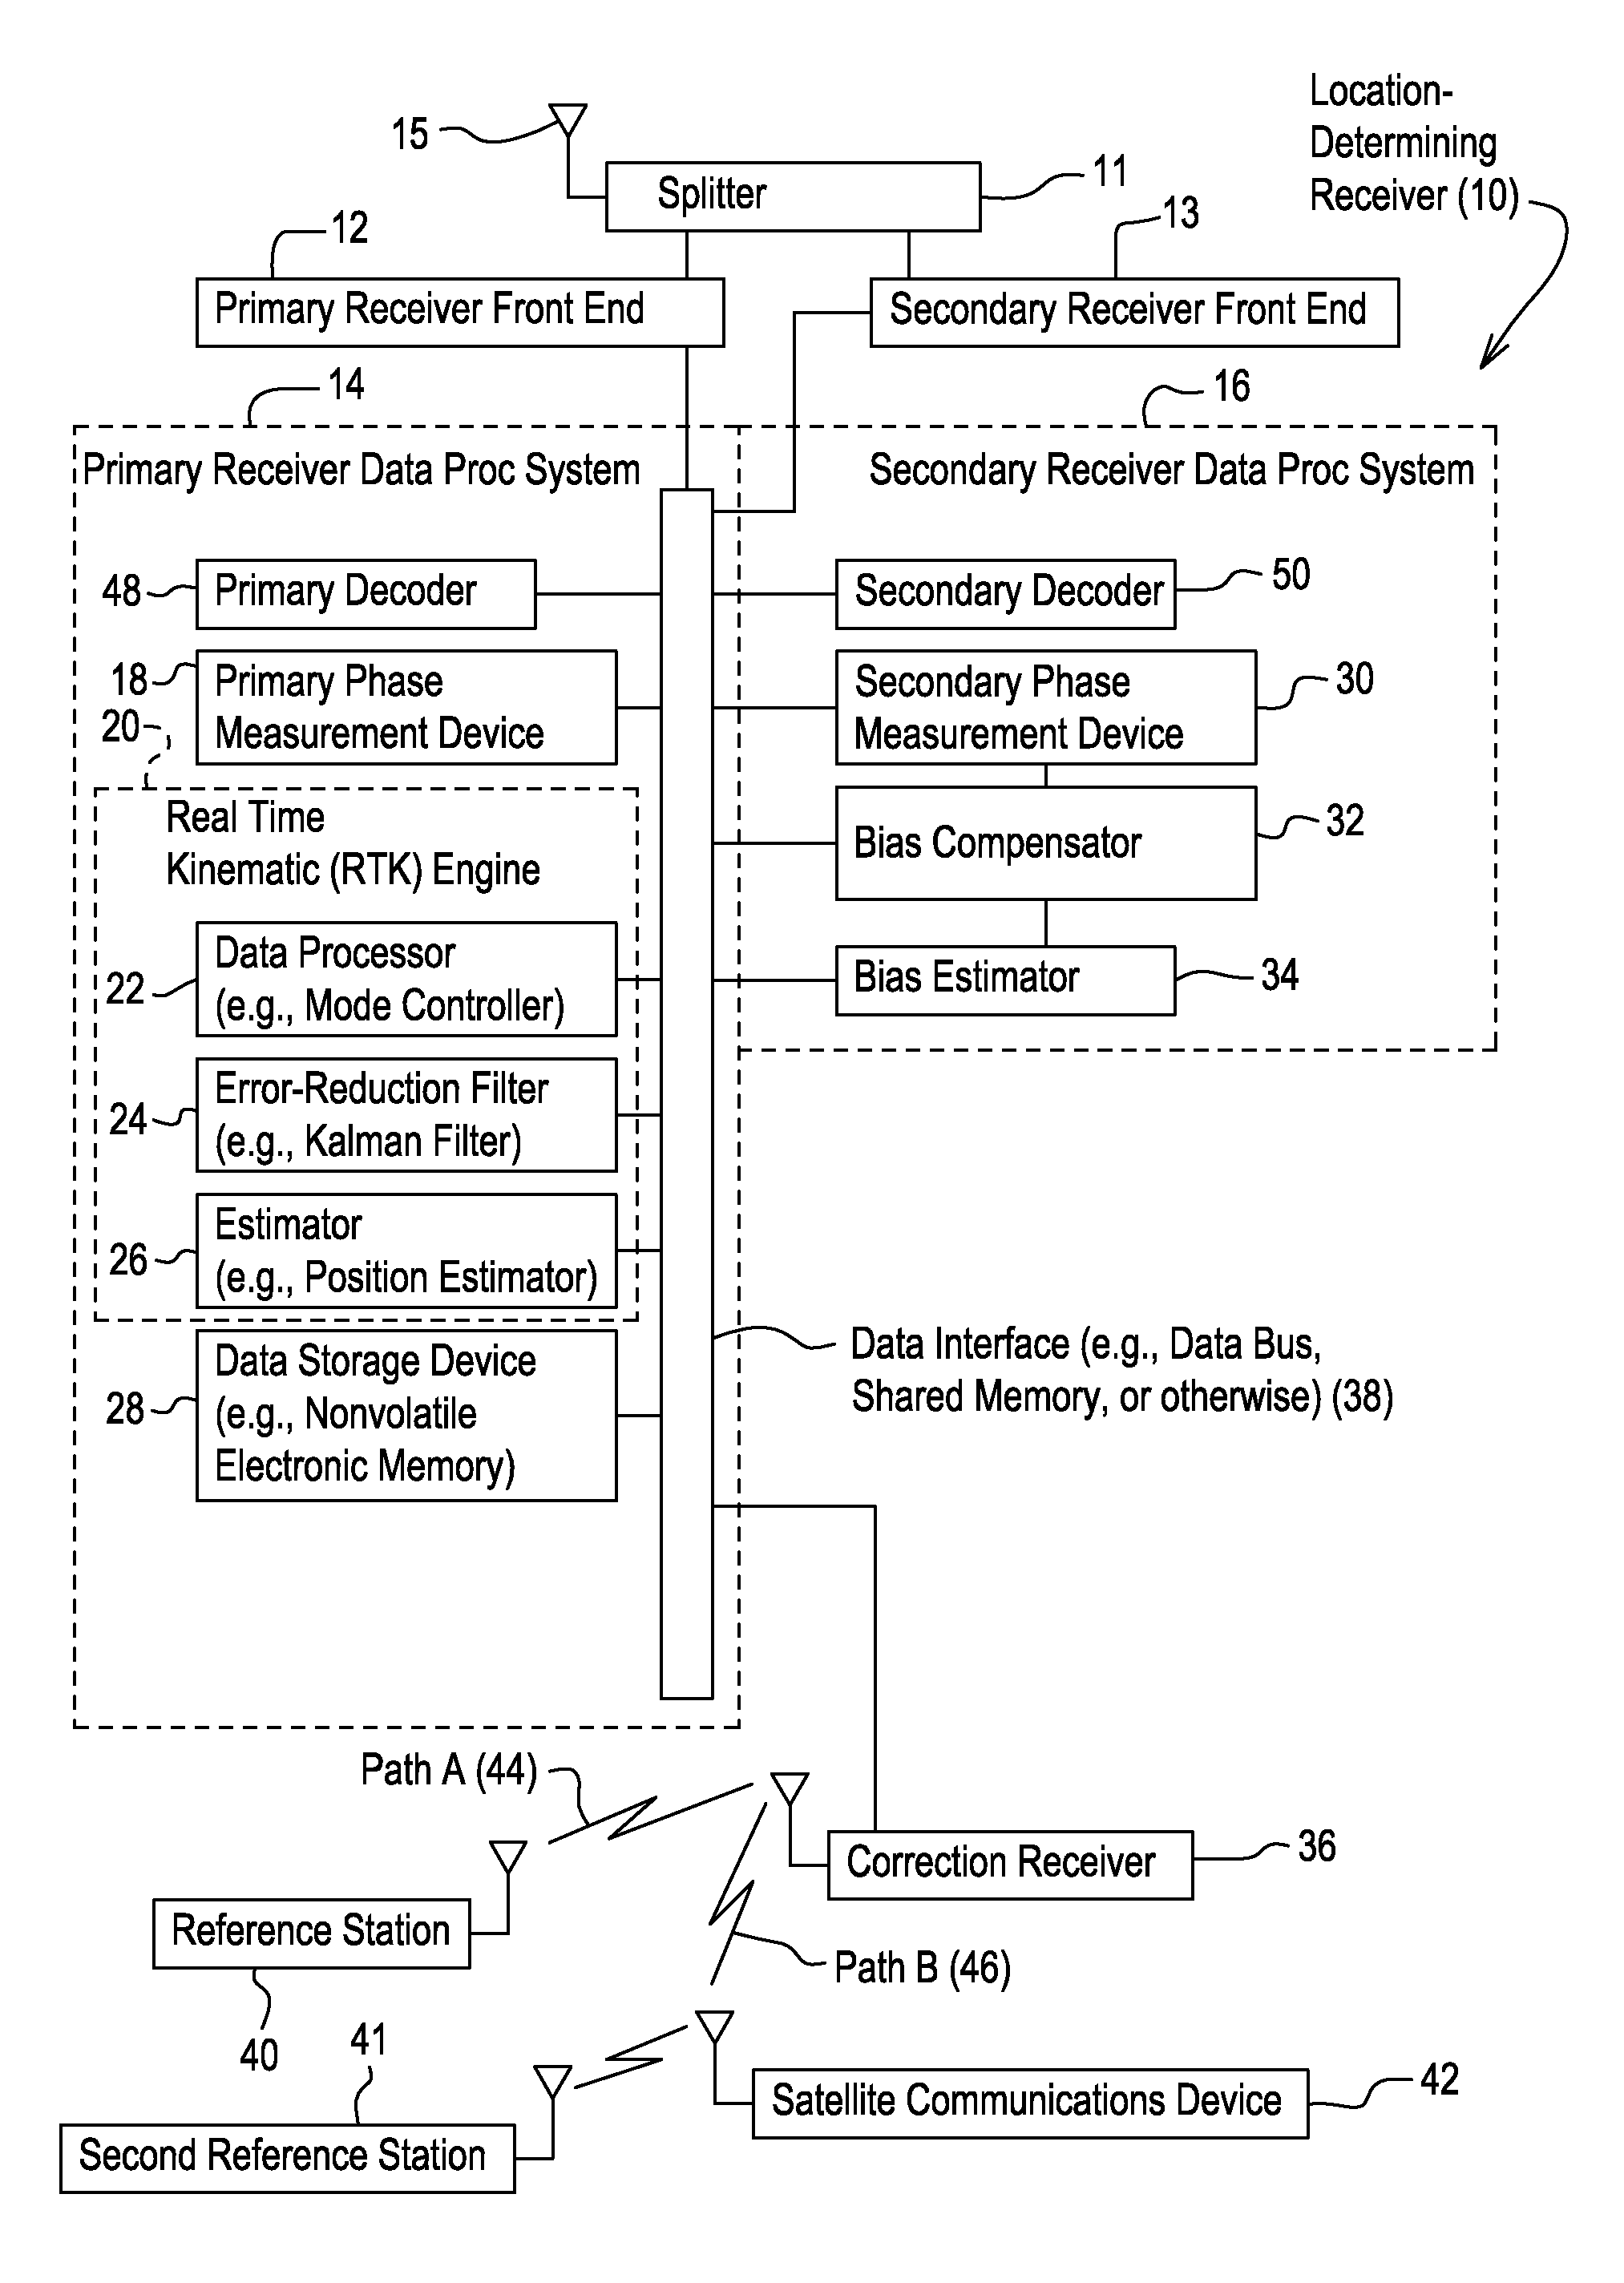 Method and system for estimating position with bias compensation